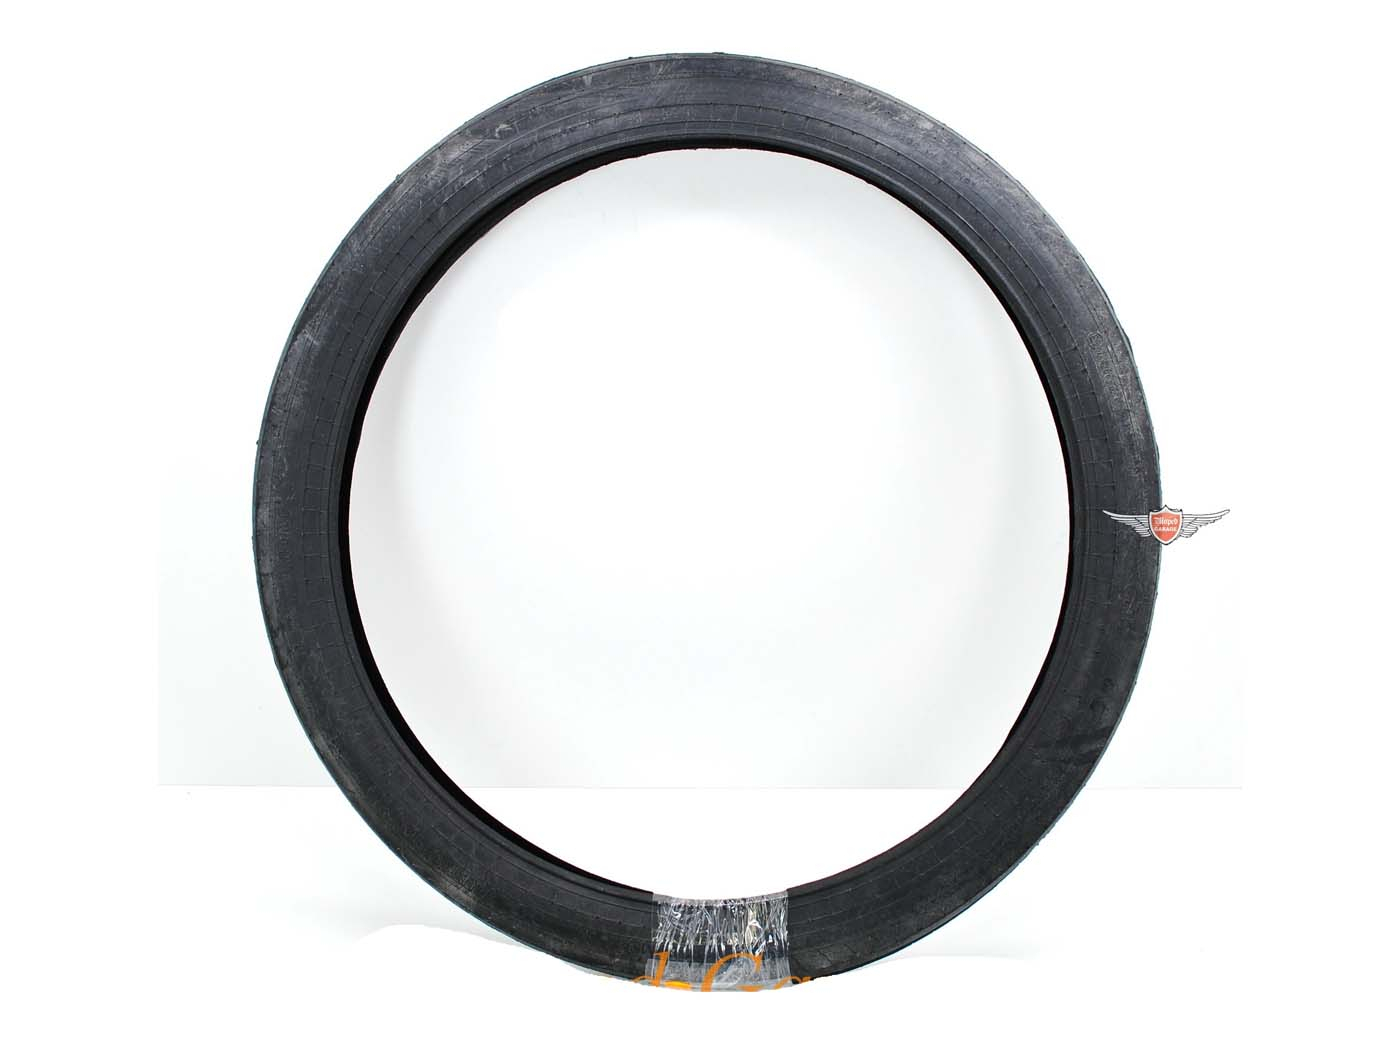 Tires Hutchinson 19 Inch For Velosolex Moped Moped